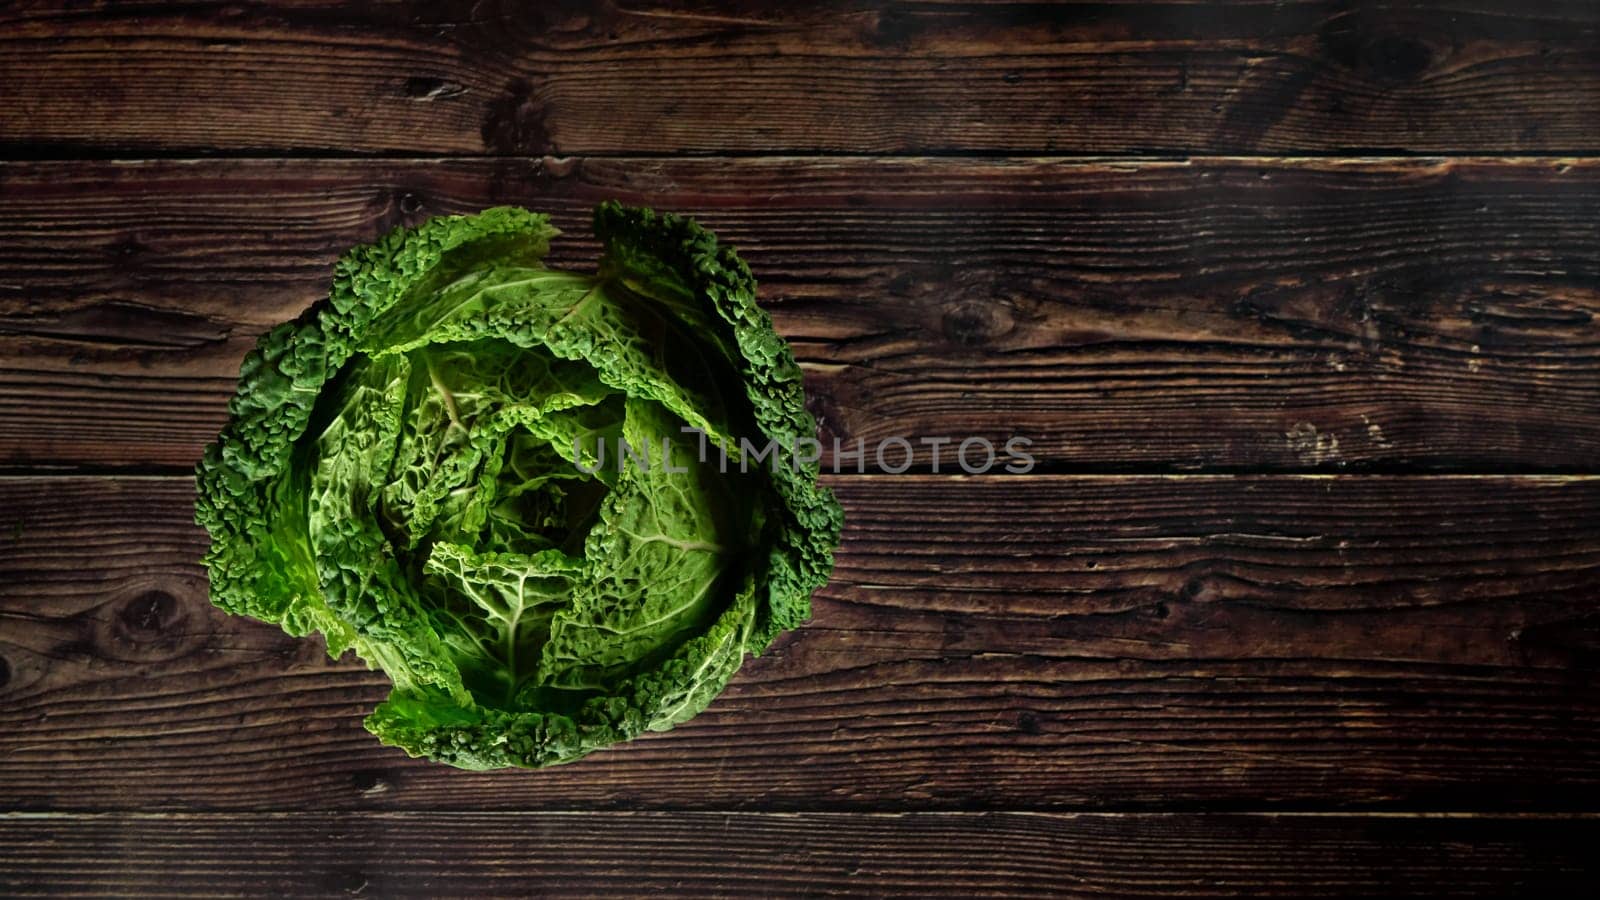 Top down view, single raw savoy kale cabbage on dark wooden board, wide banner space for text right side by Ivanko